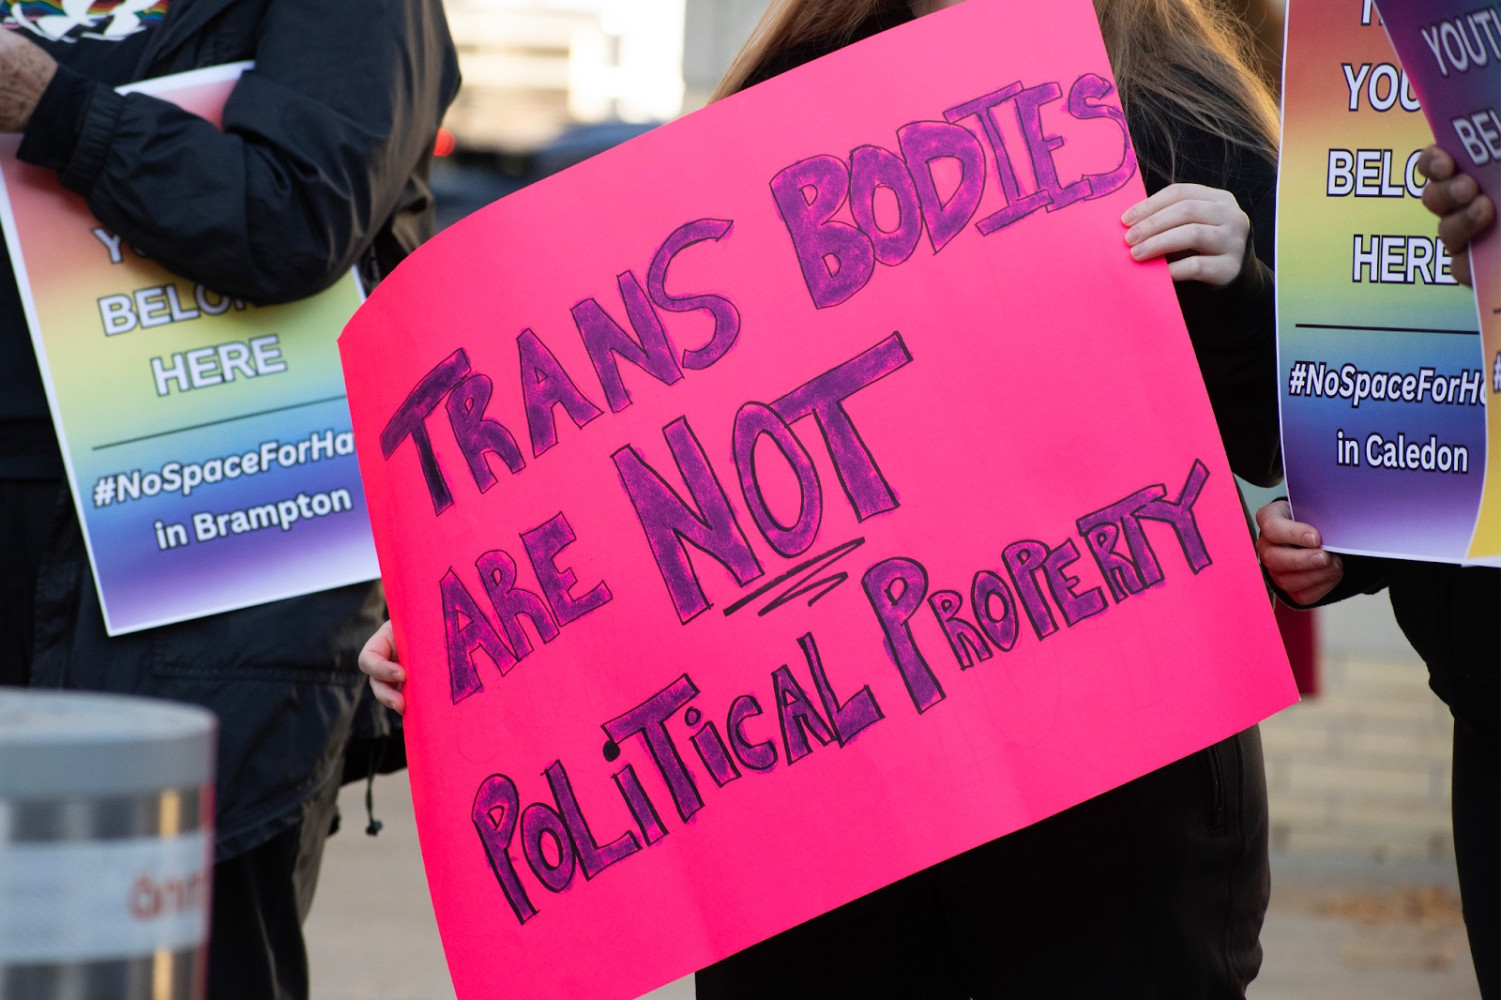 Residents gather in Mississauga to support trans, queer youth and counter protests fueled by intolerance